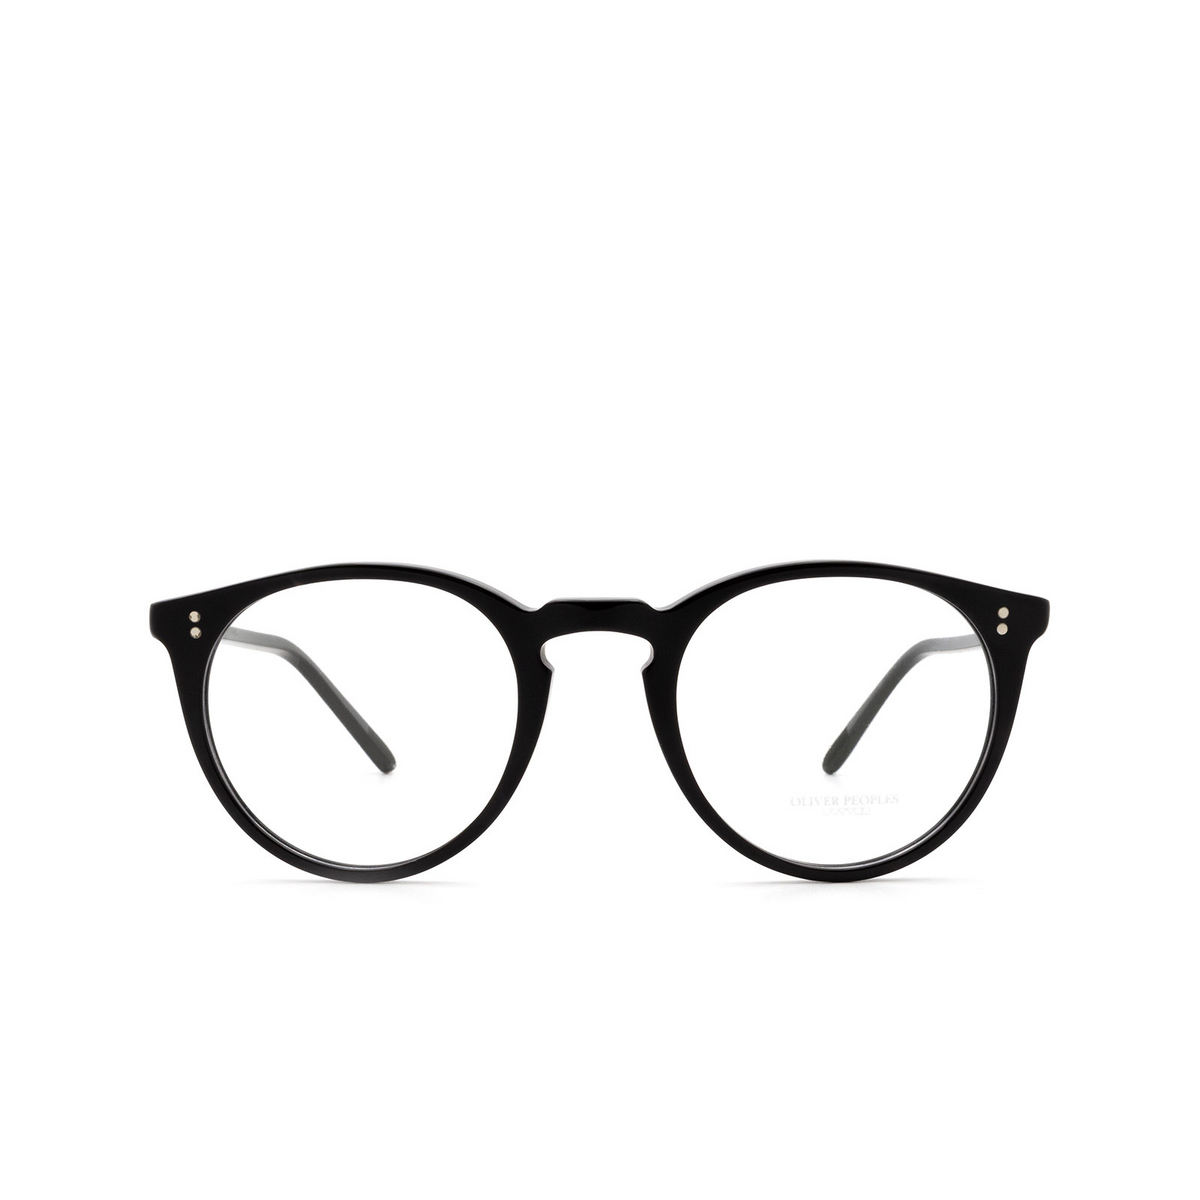 Oliver Peoples O'MALLEY Eyeglasses 1005L Black - front view